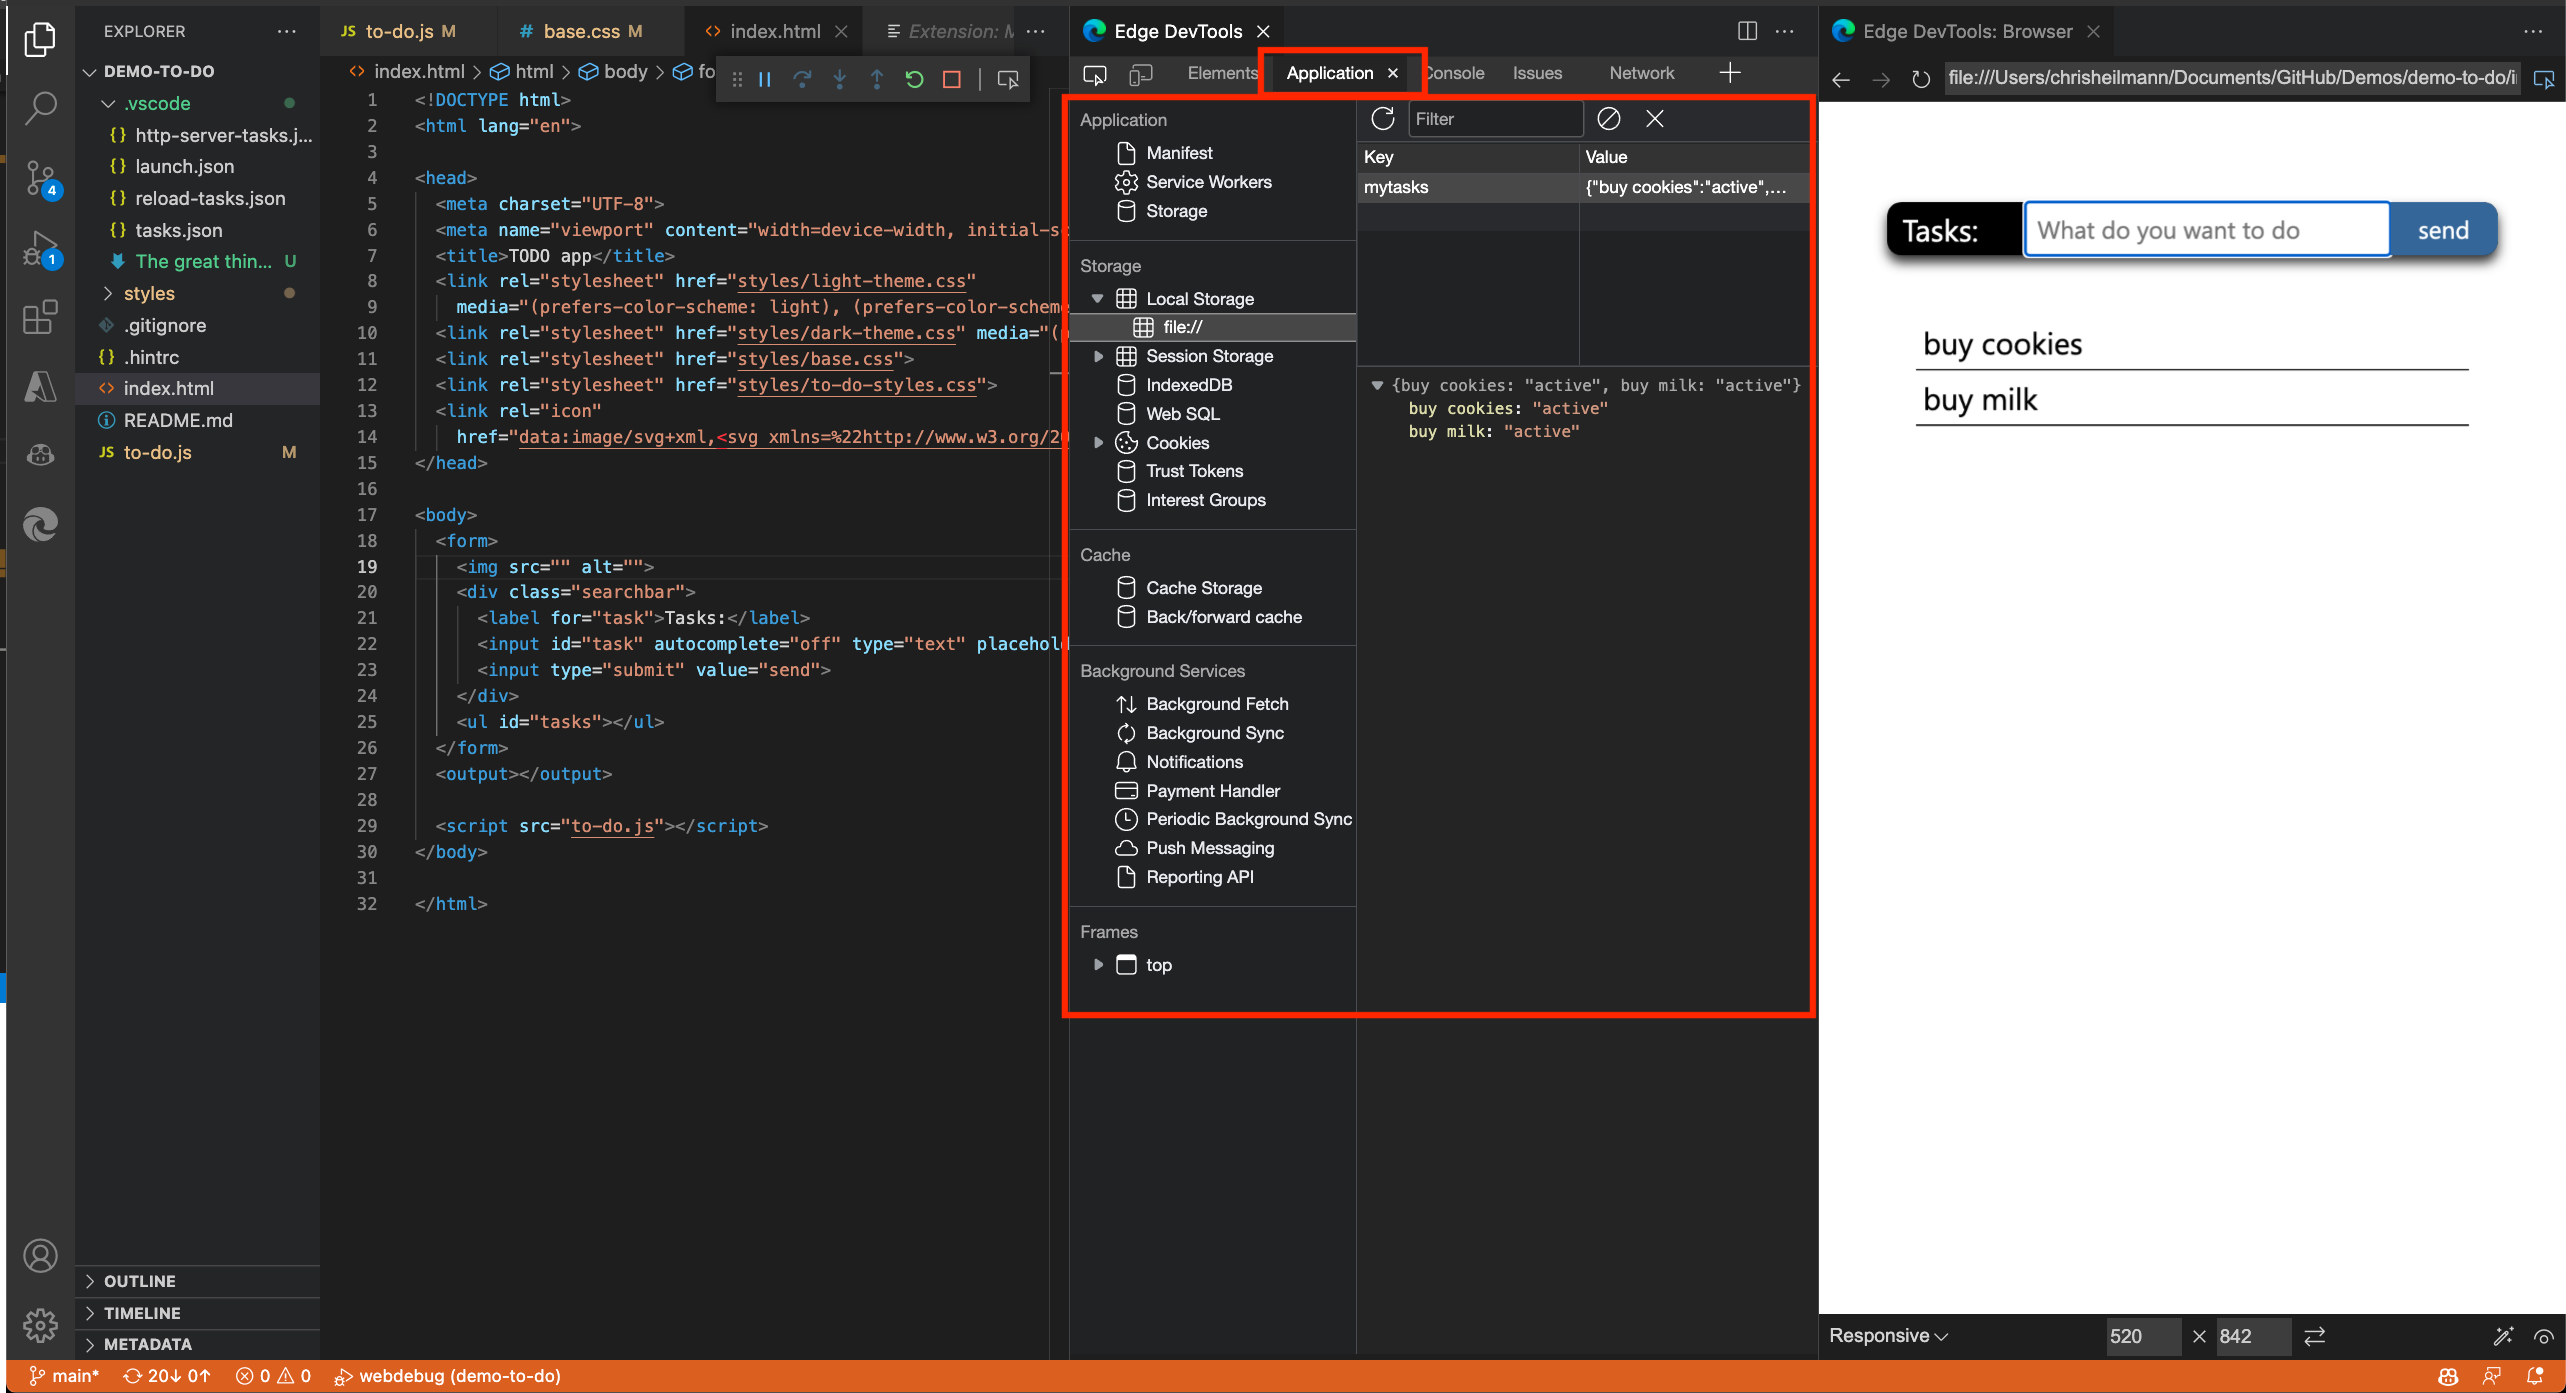 The Application tool inside the Edge DevTools for Visual Studio Code extension